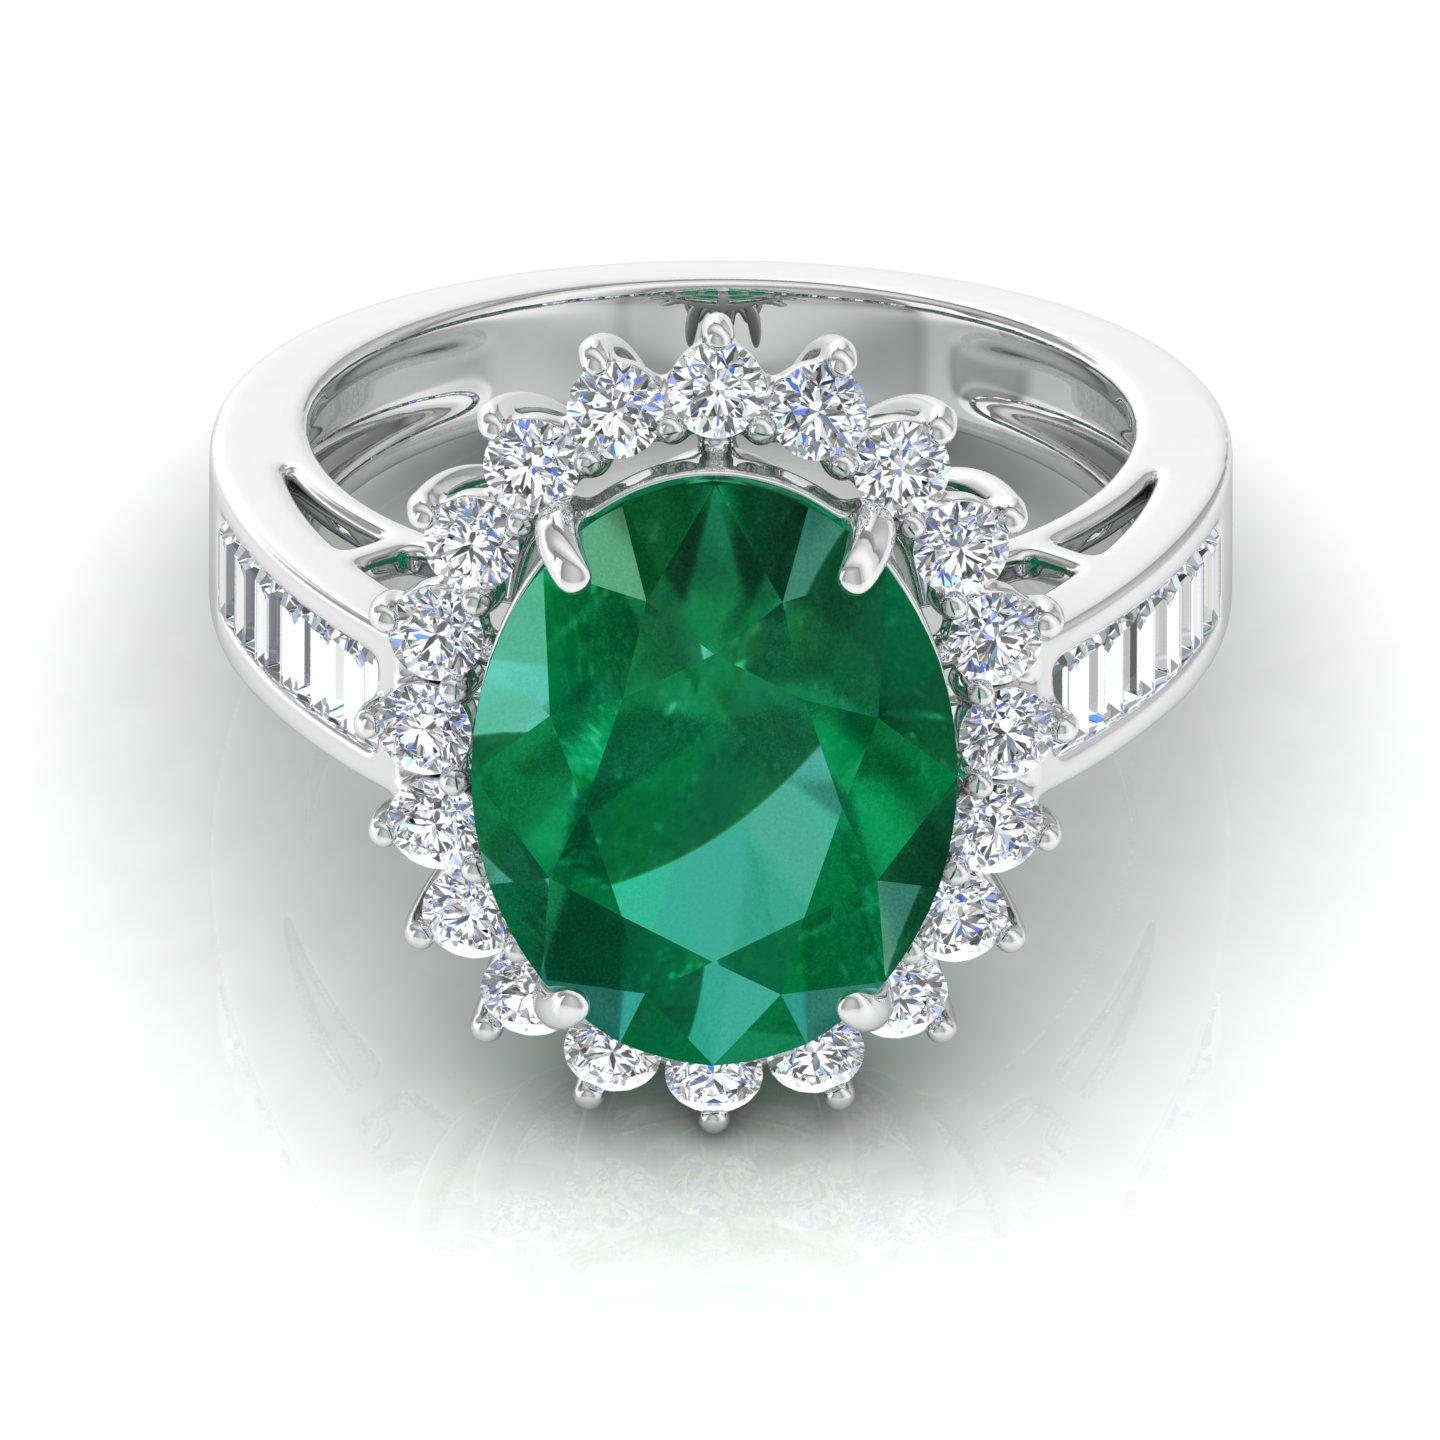 For Sale:  Oval Natural Emerald Gemstone Cocktail Ring Diamond 10 Karat White Gold Jewelry 6